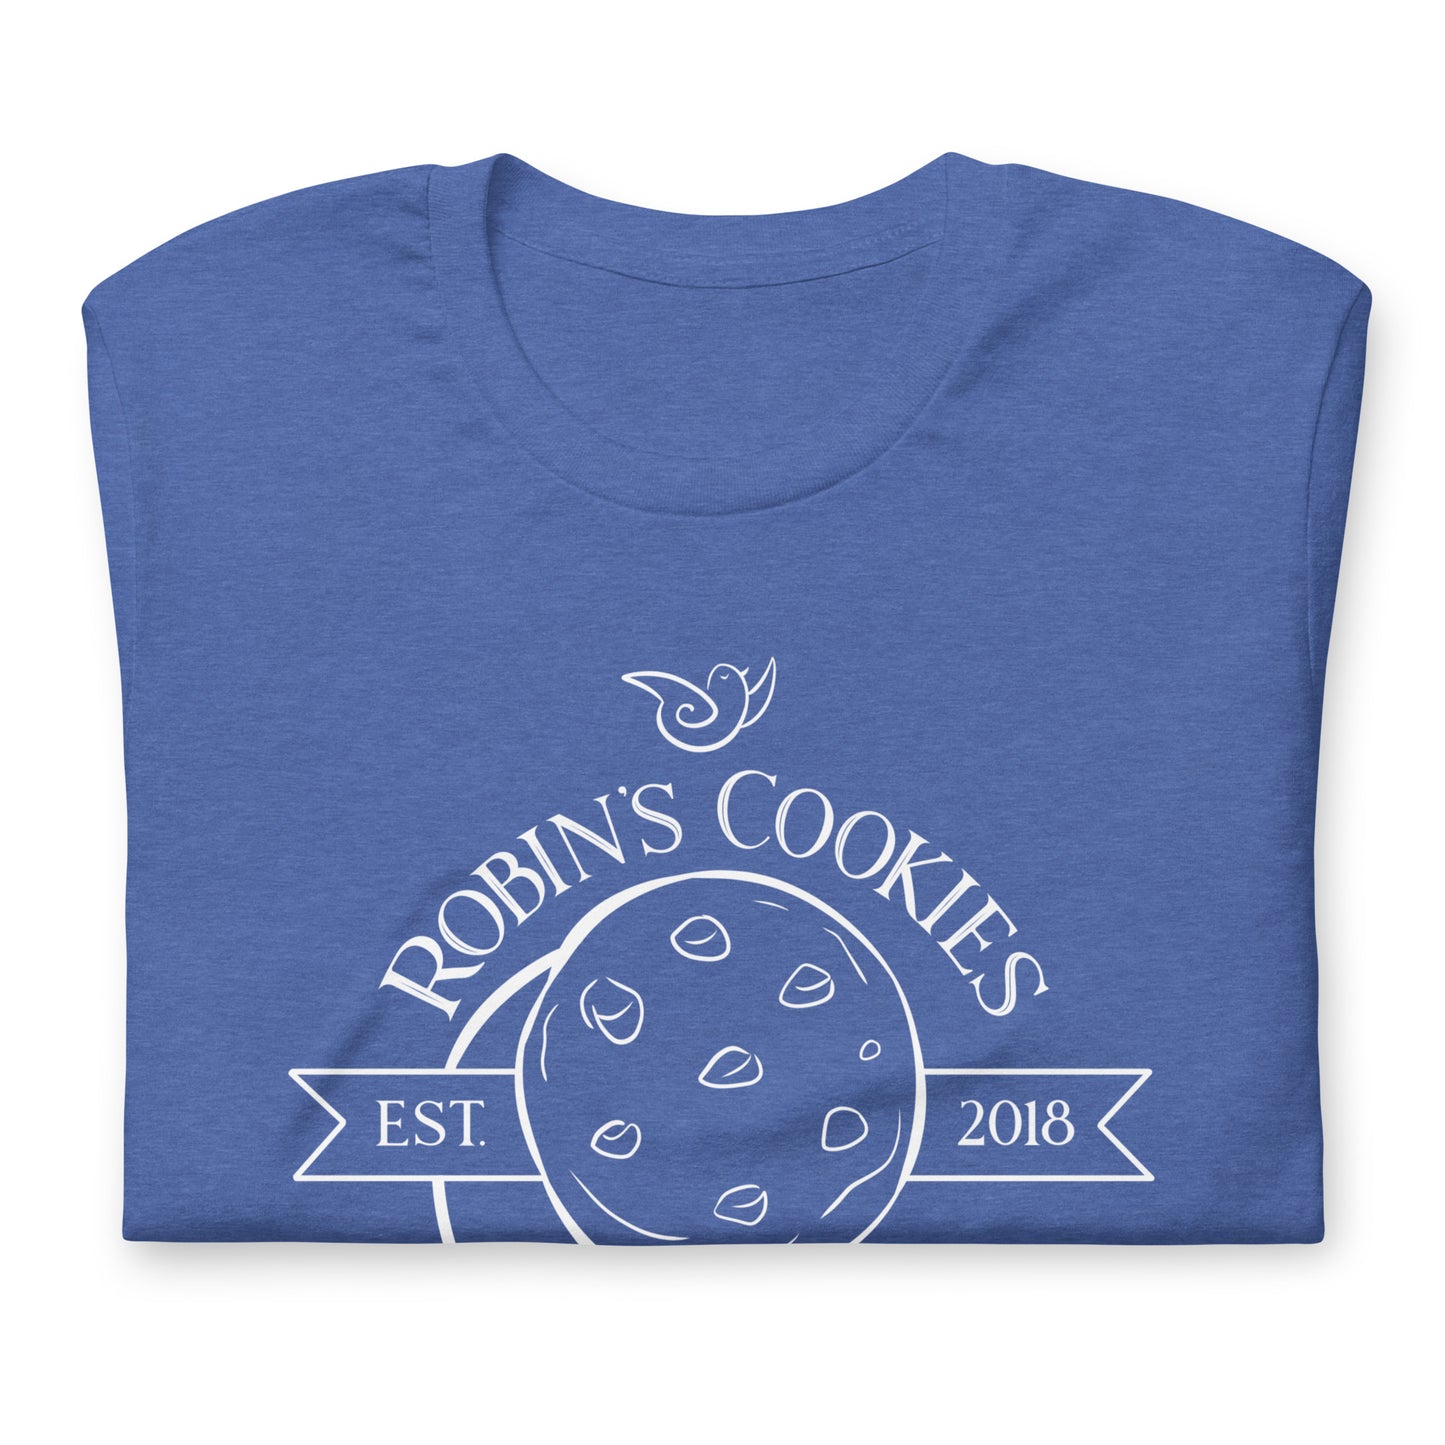 "Robin's Cookies" Unisex T-shirt (The Guild Codex)